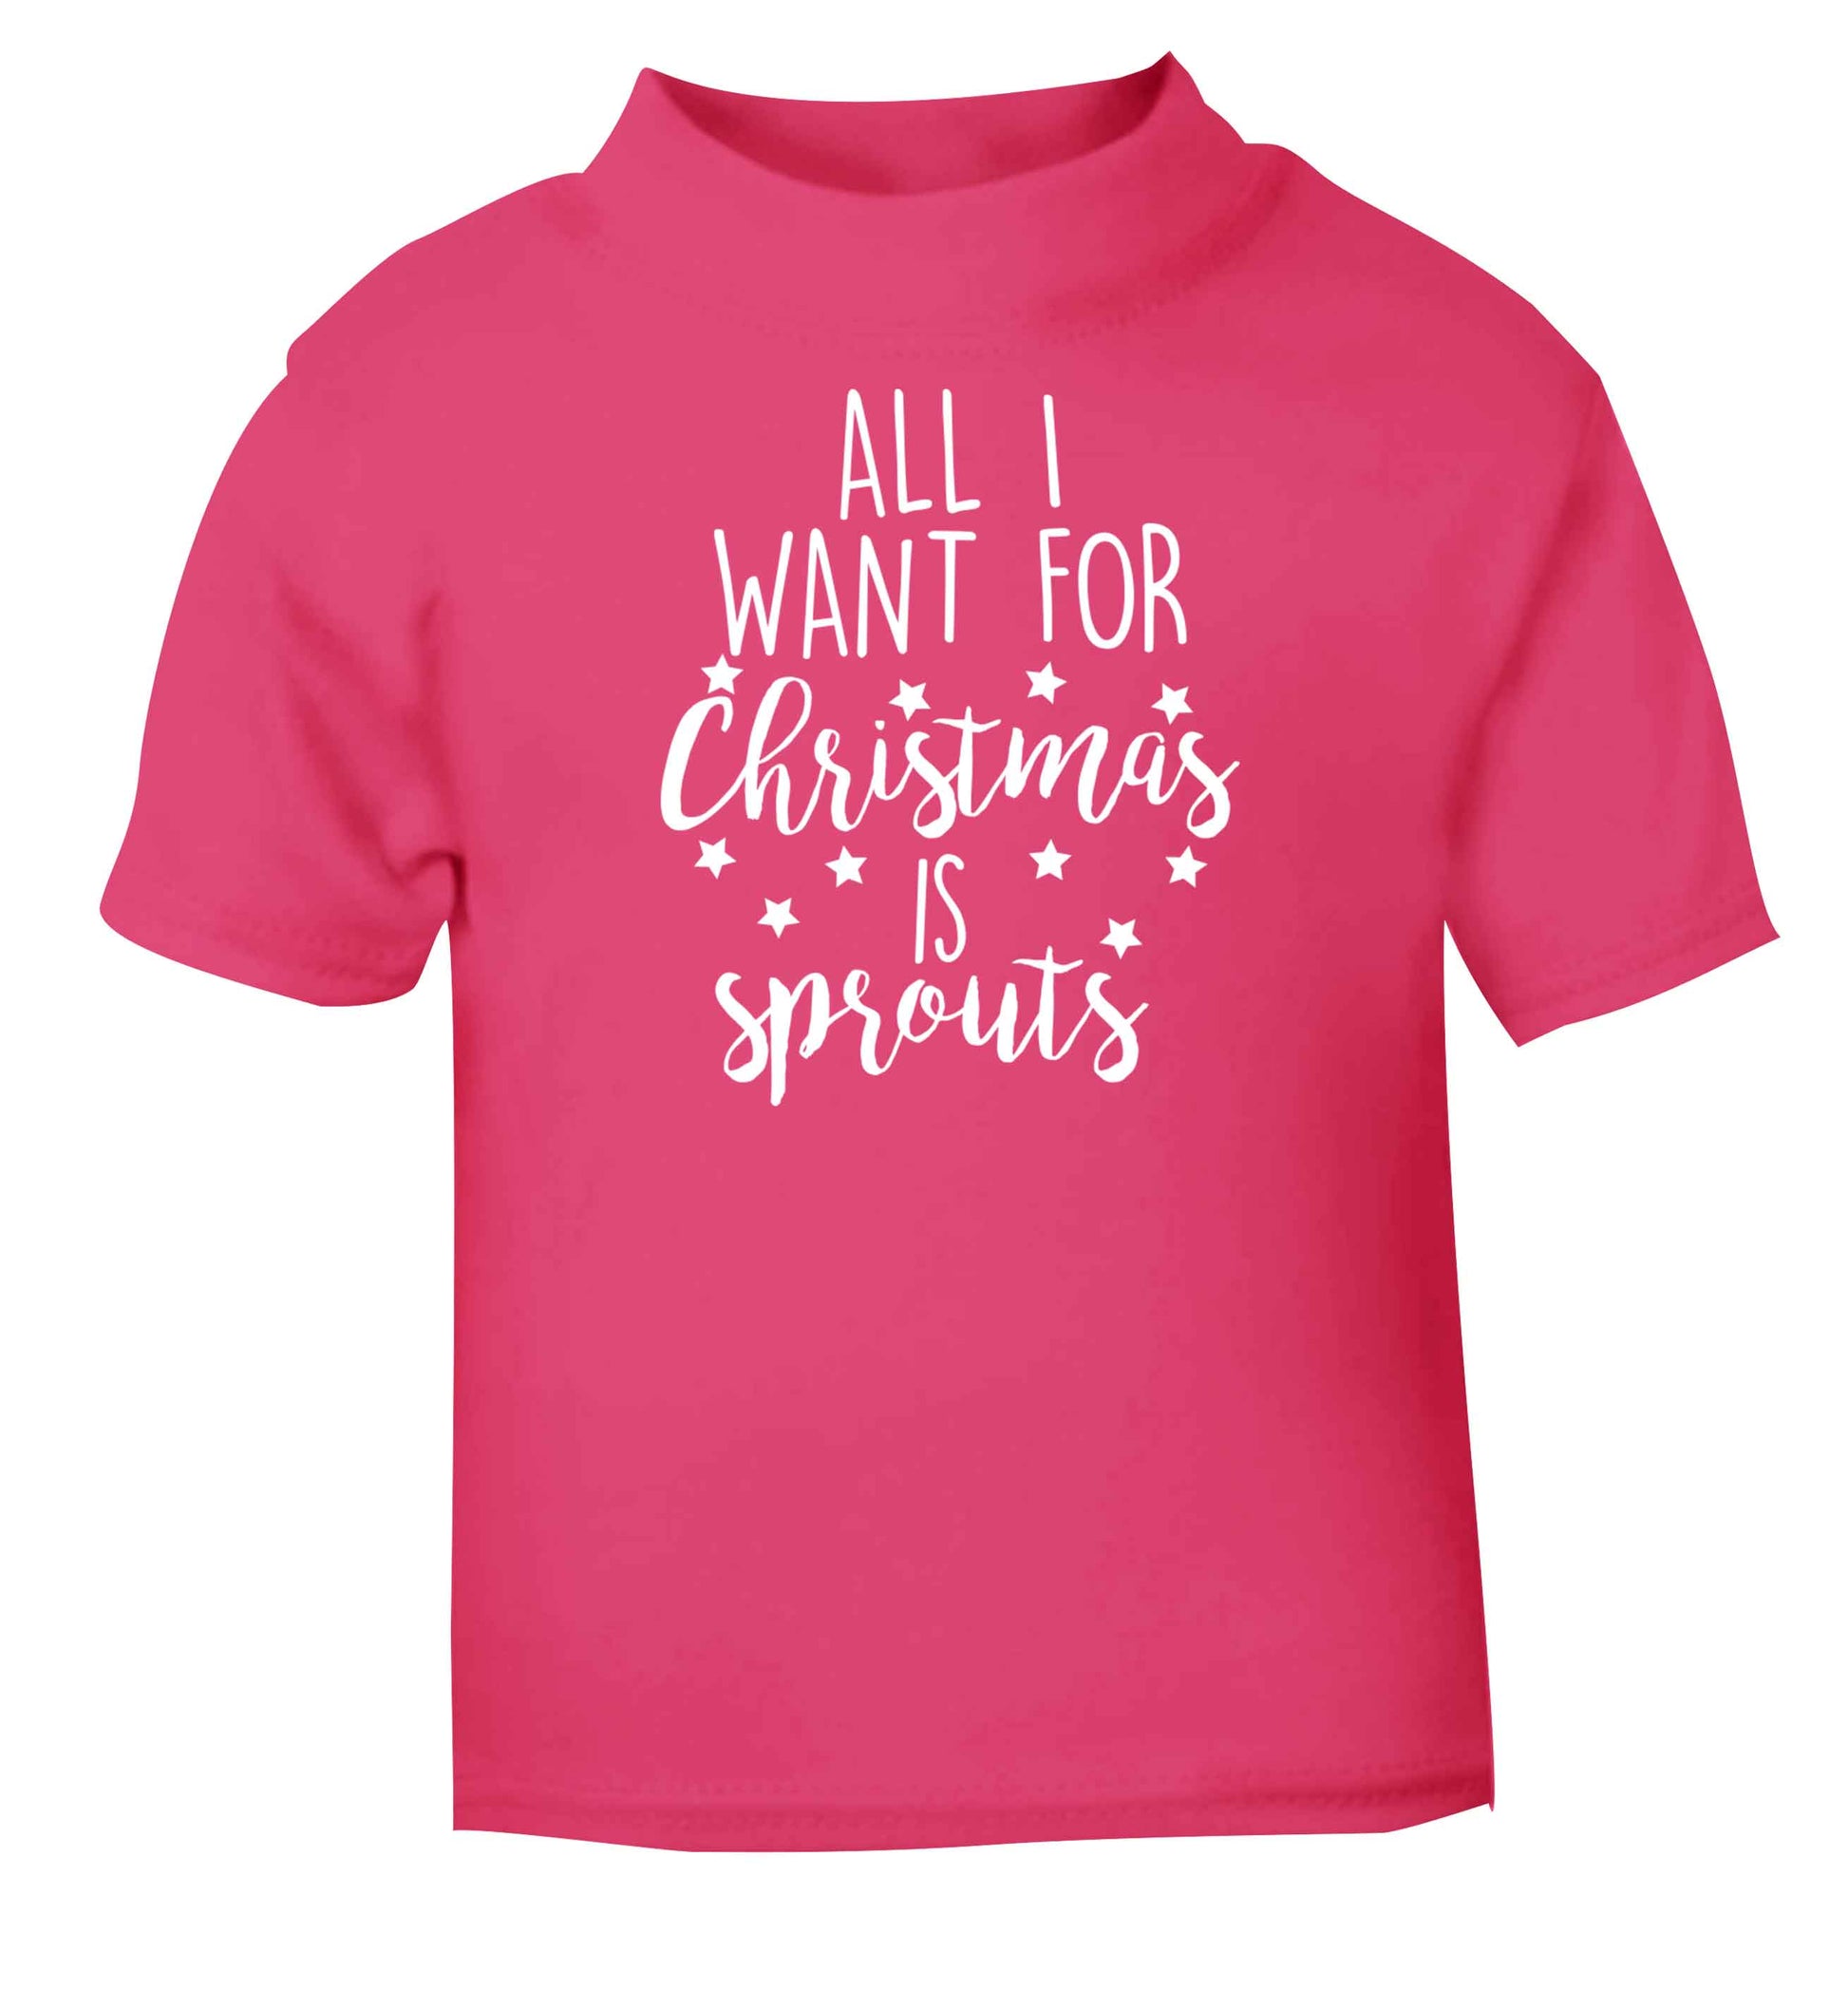 All I want for Christmas is sprouts pink baby toddler Tshirt 2 Years